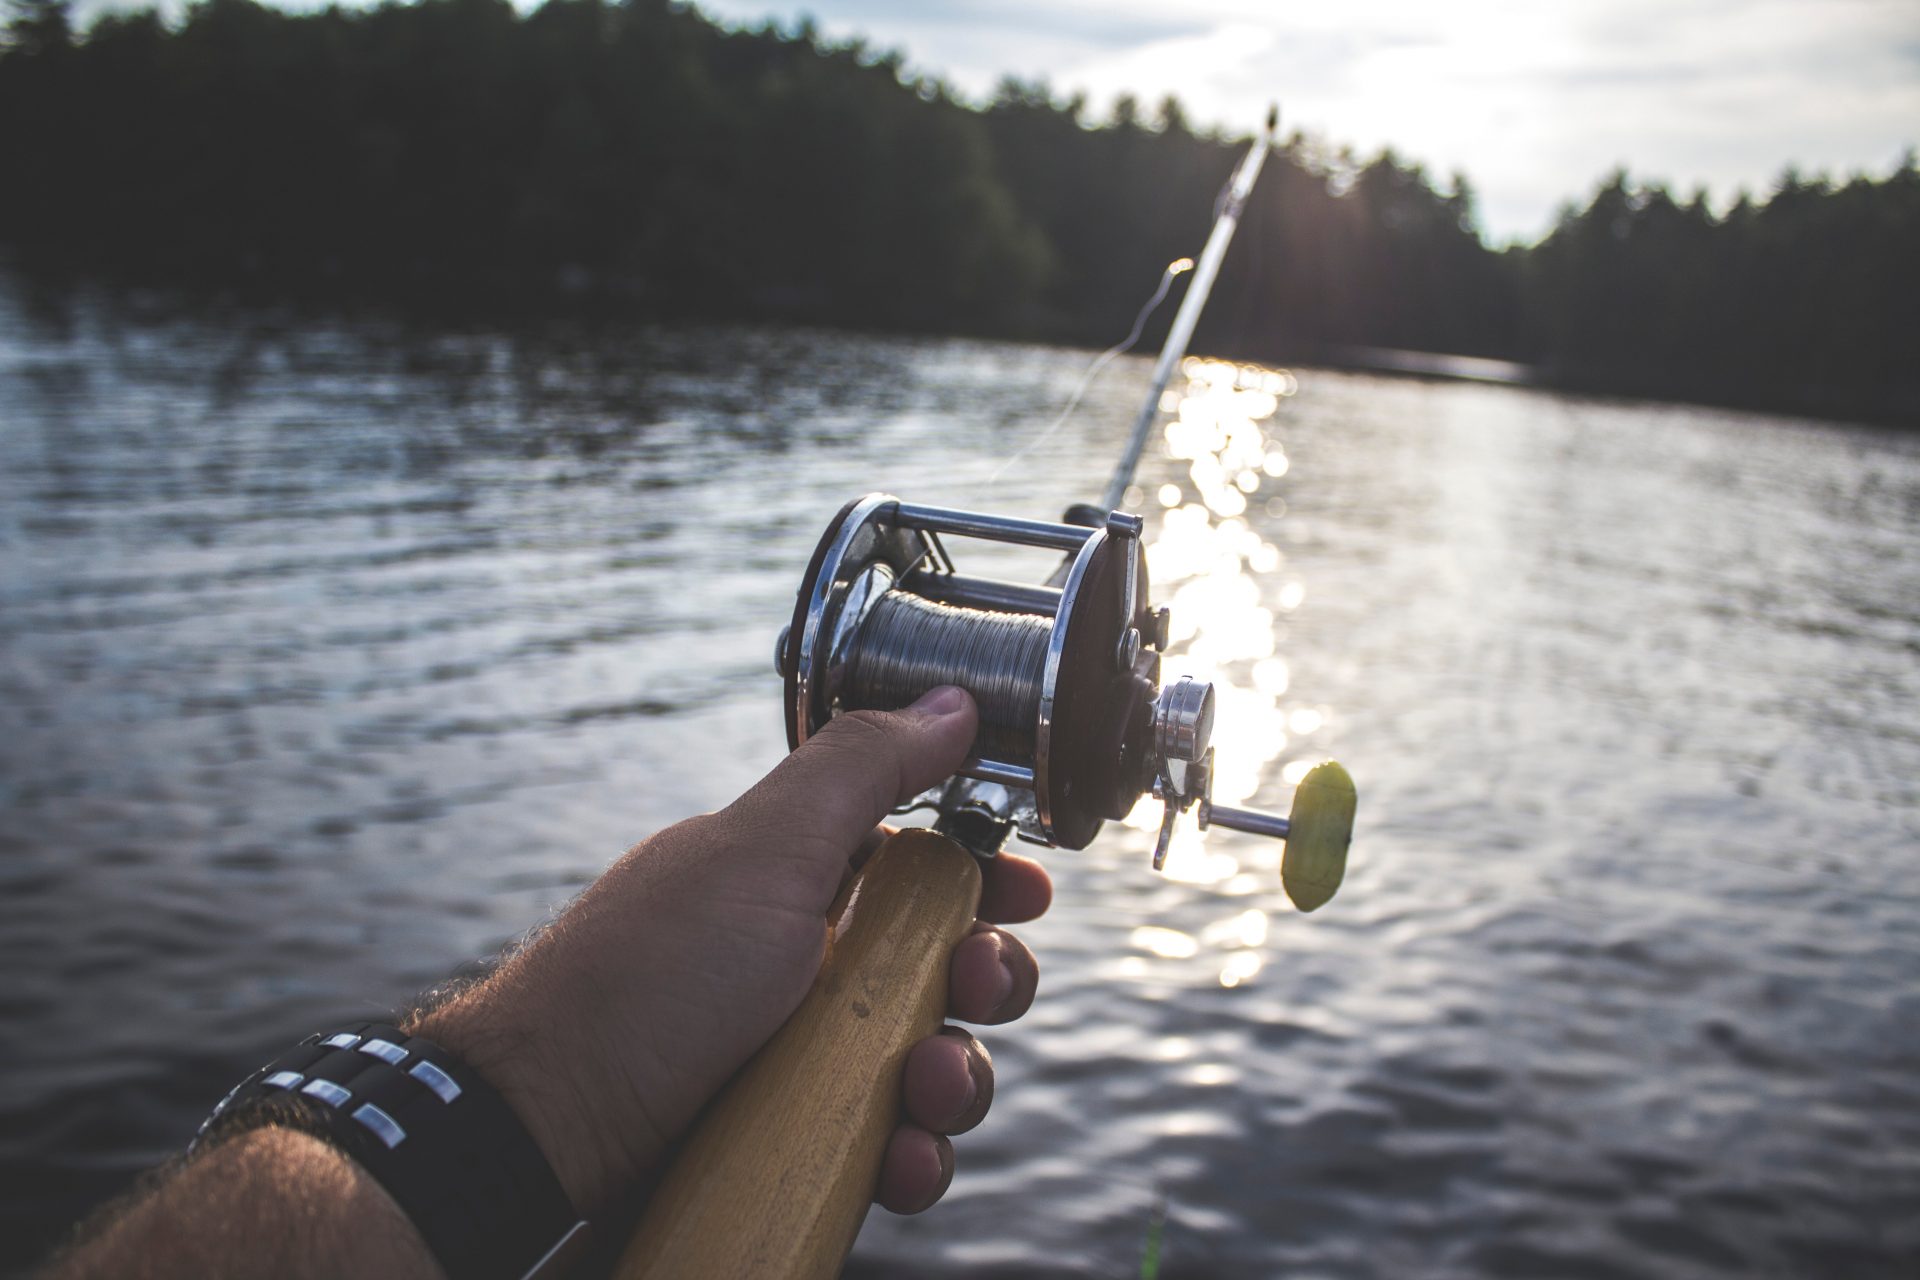 Fishing rod with spinning reel casted into body of water